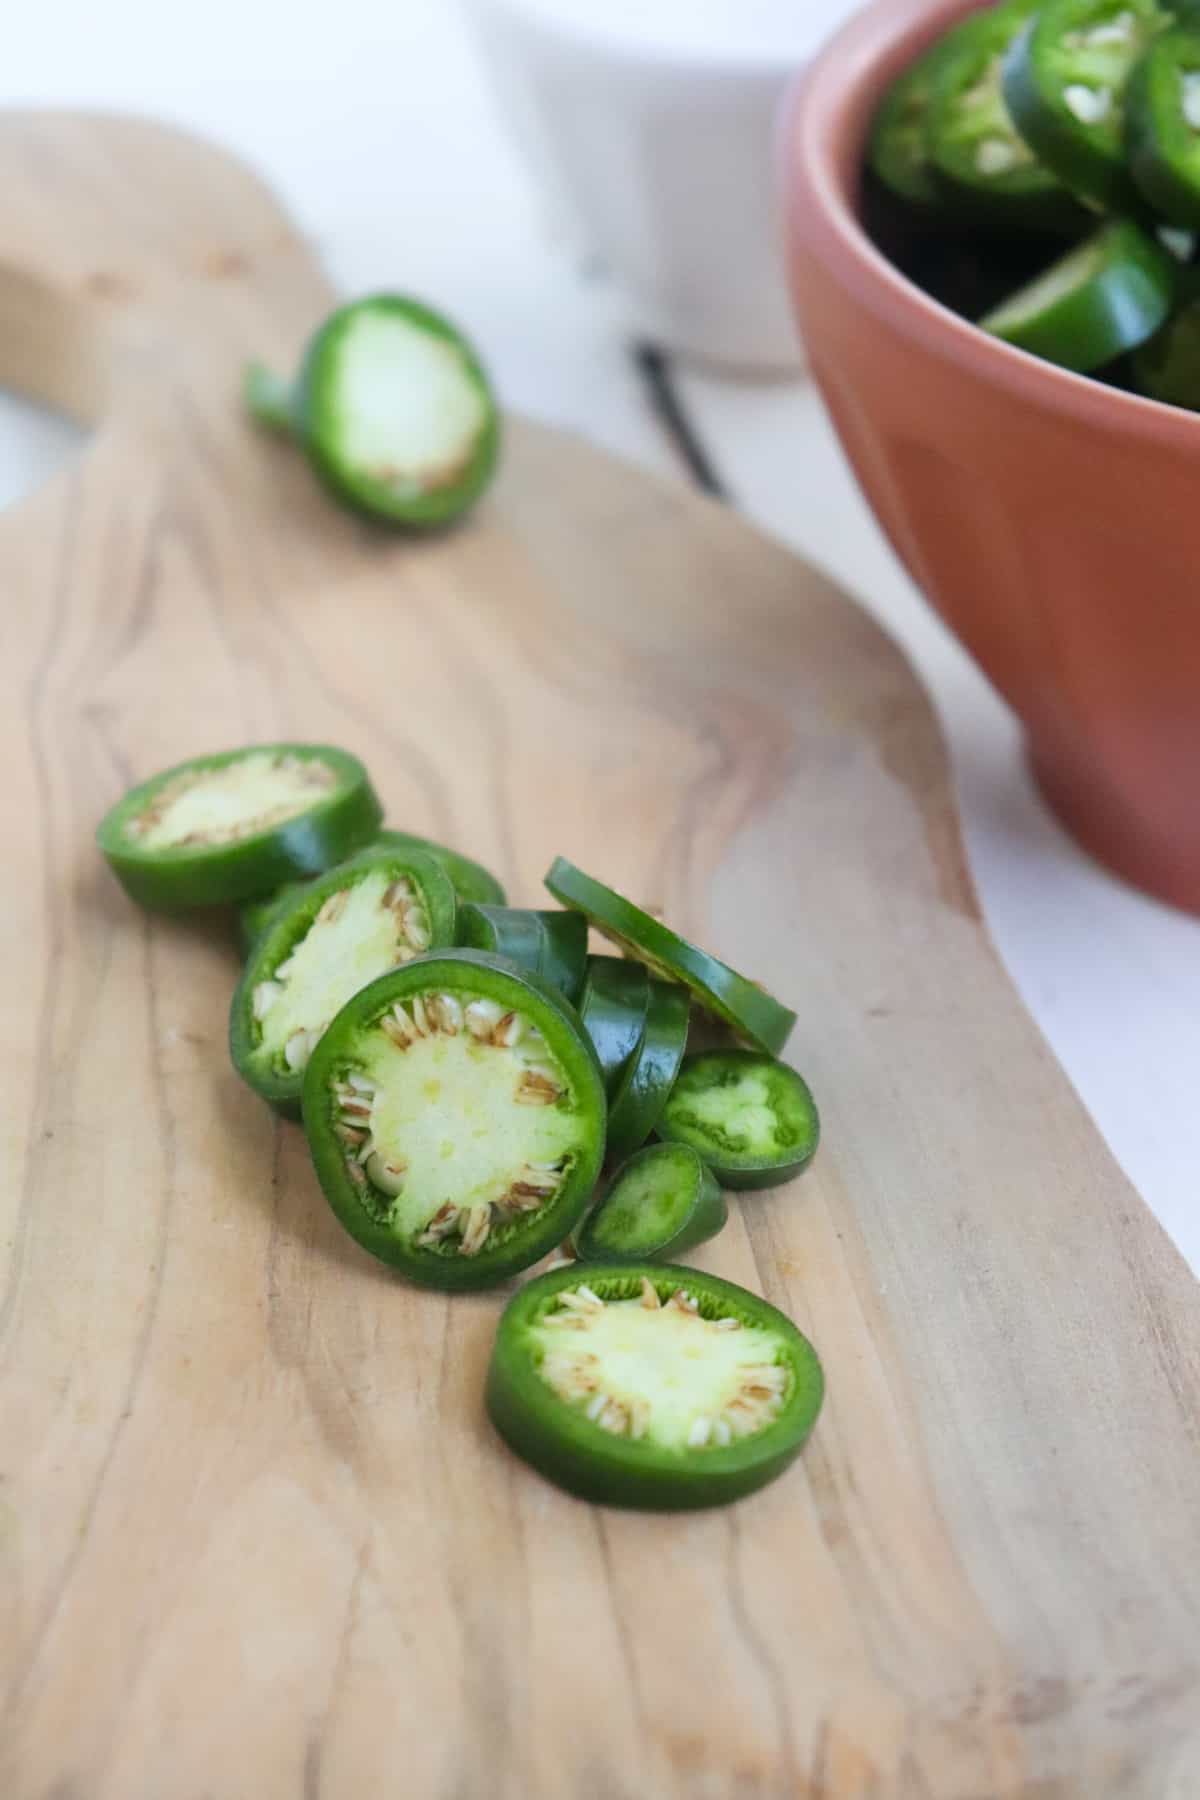 slices of fresh jalapeno on a wooden cutting board.